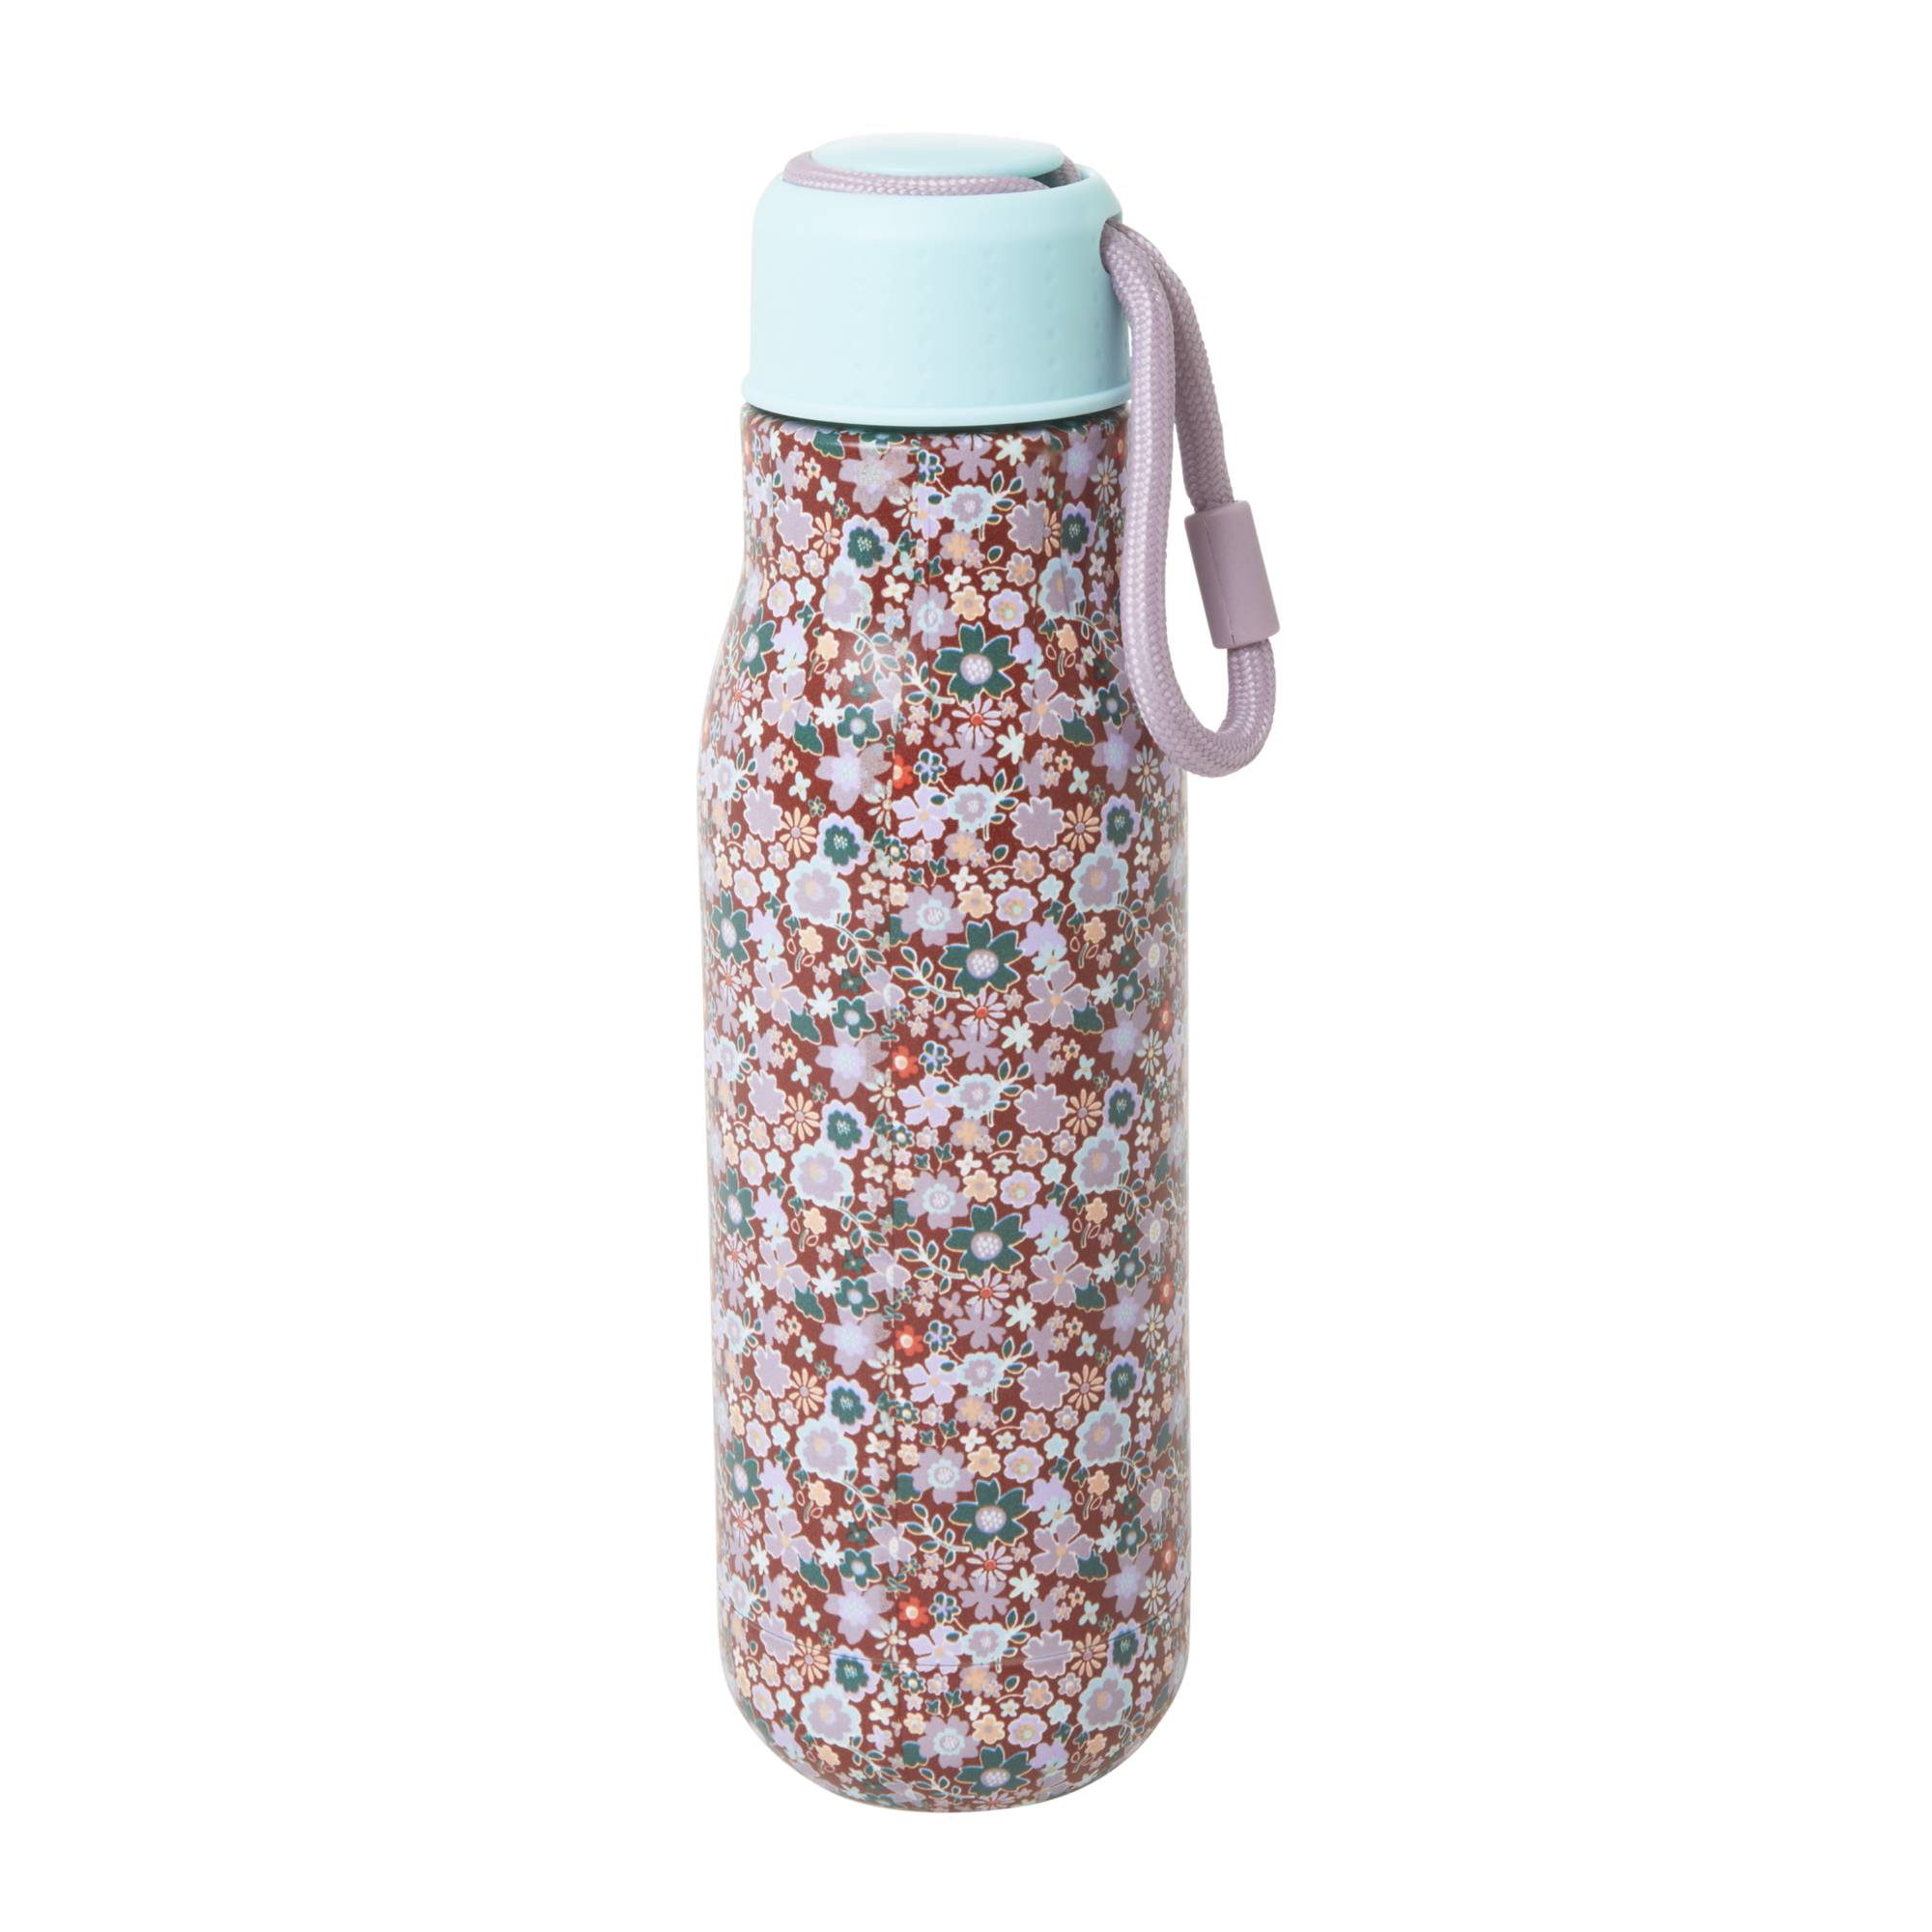 Rice - Stainless Steel Thermo Drinking Bottle 500 ml - Fall Floral Print